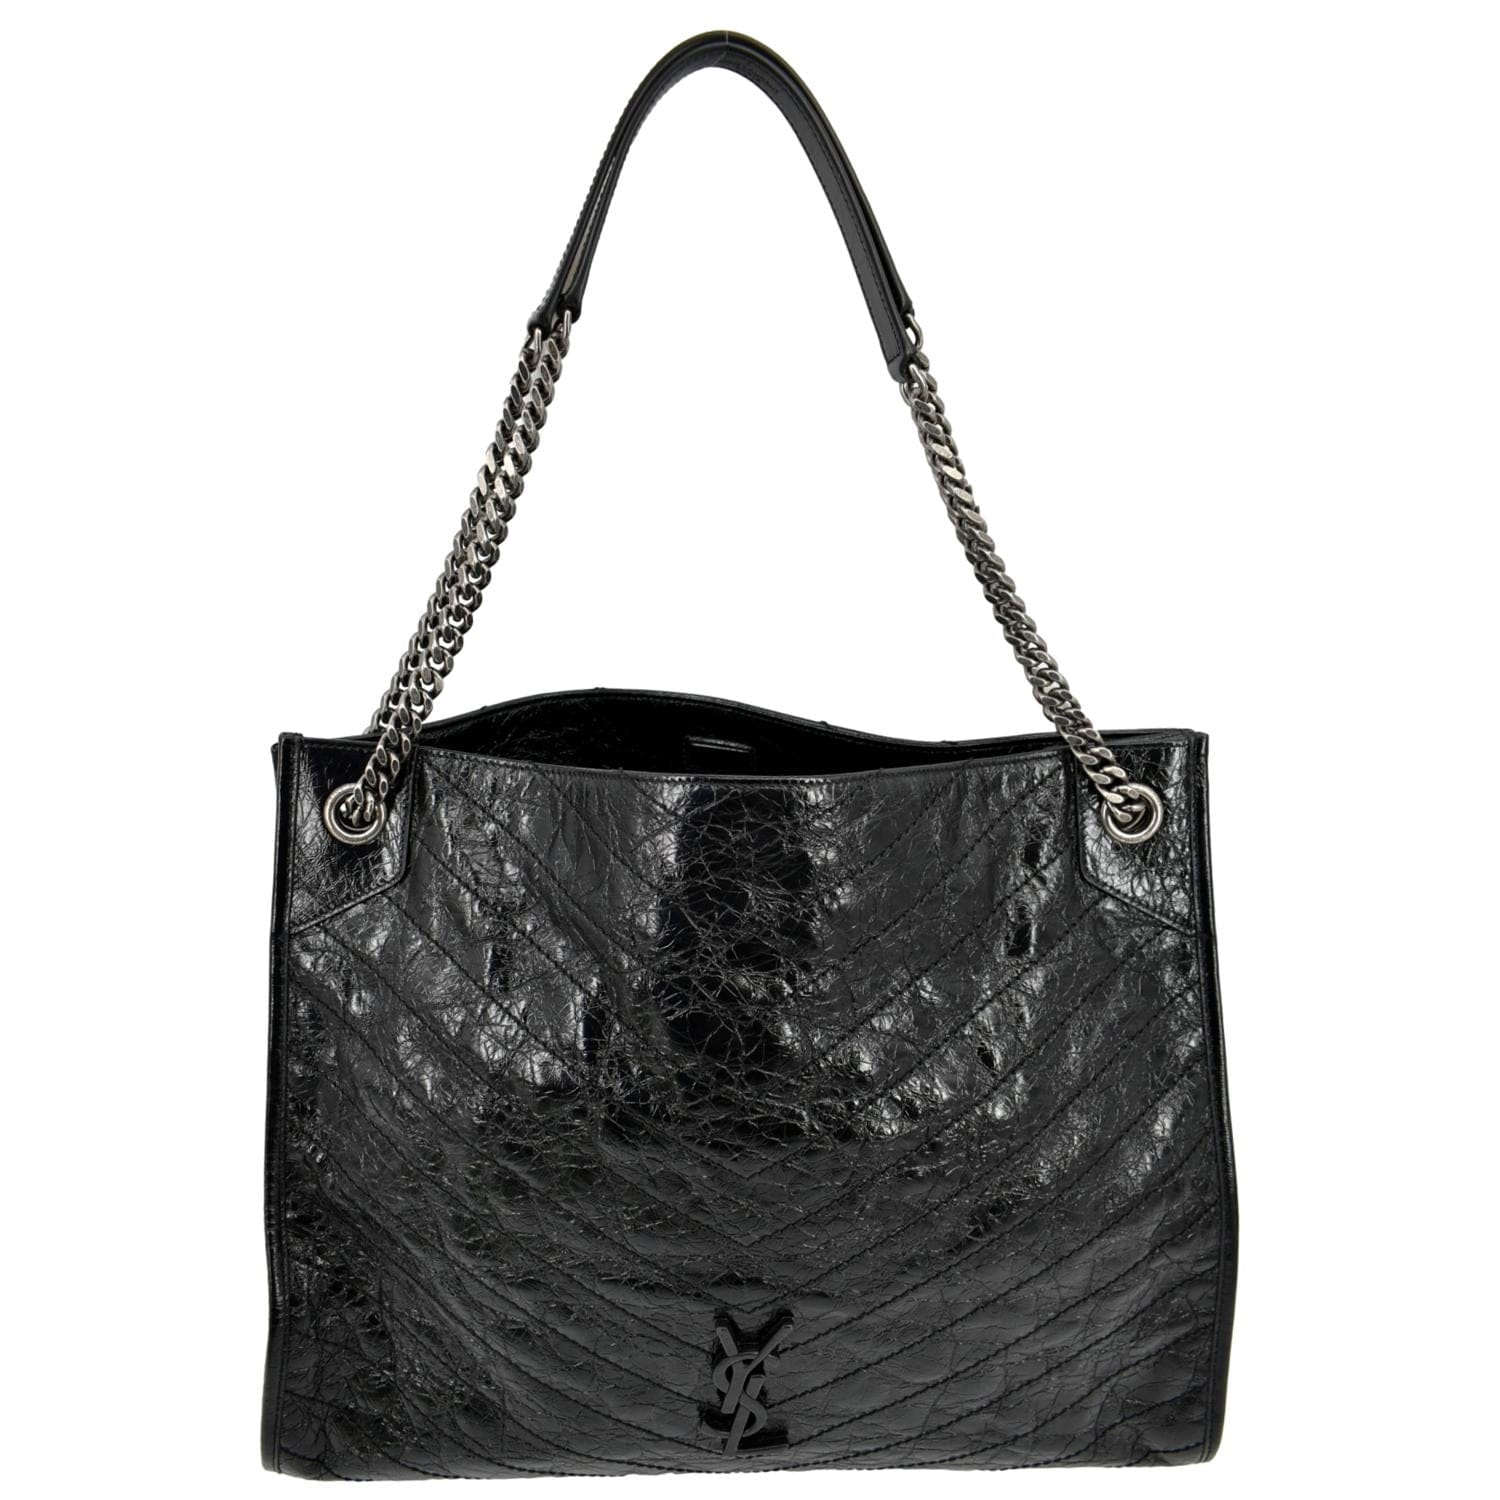 Saint Laurent Large Niki Chain Bag in Crinkled and Quilted Leather